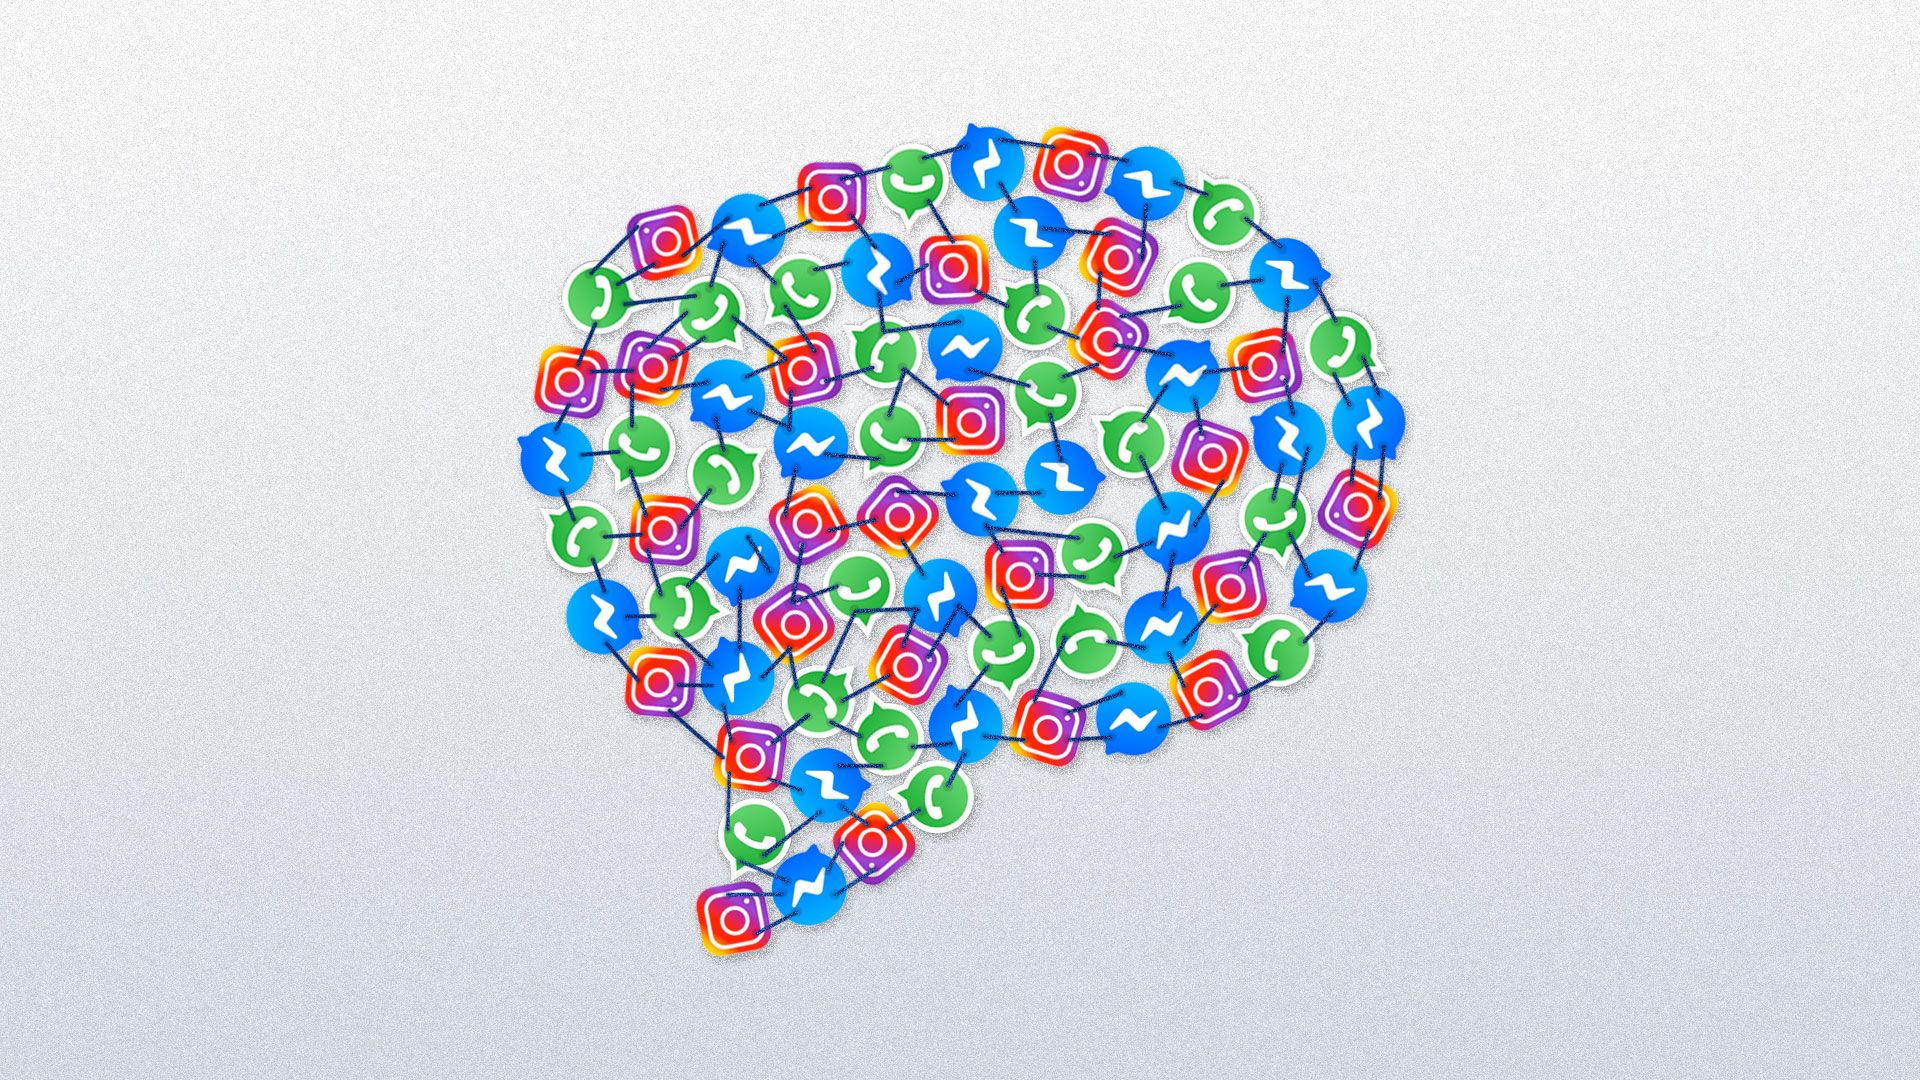  speech bubble made out of WhatsApp, Facebook Messenger and Instagram logos.